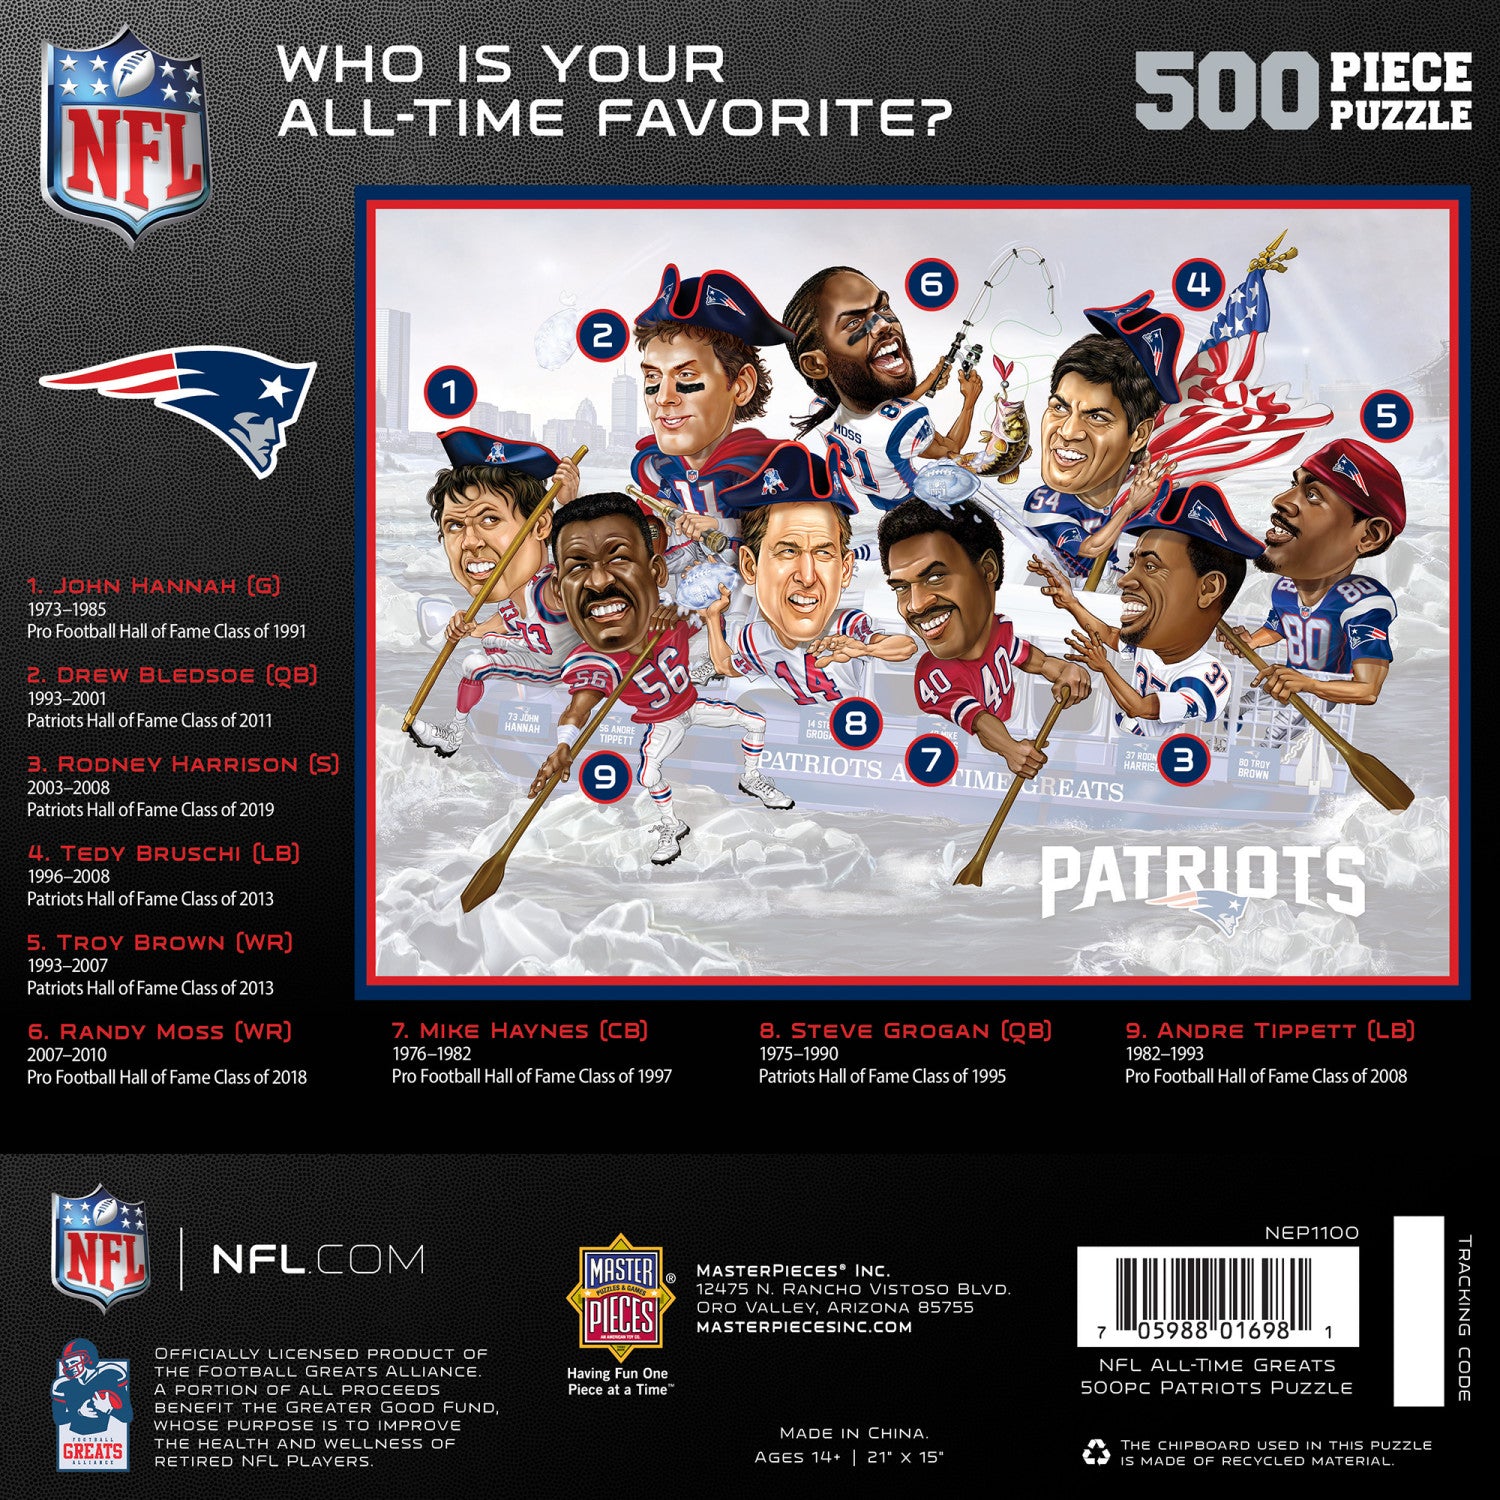 New England Patriots - All Time Greats 500 Piece Jigsaw Puzzle